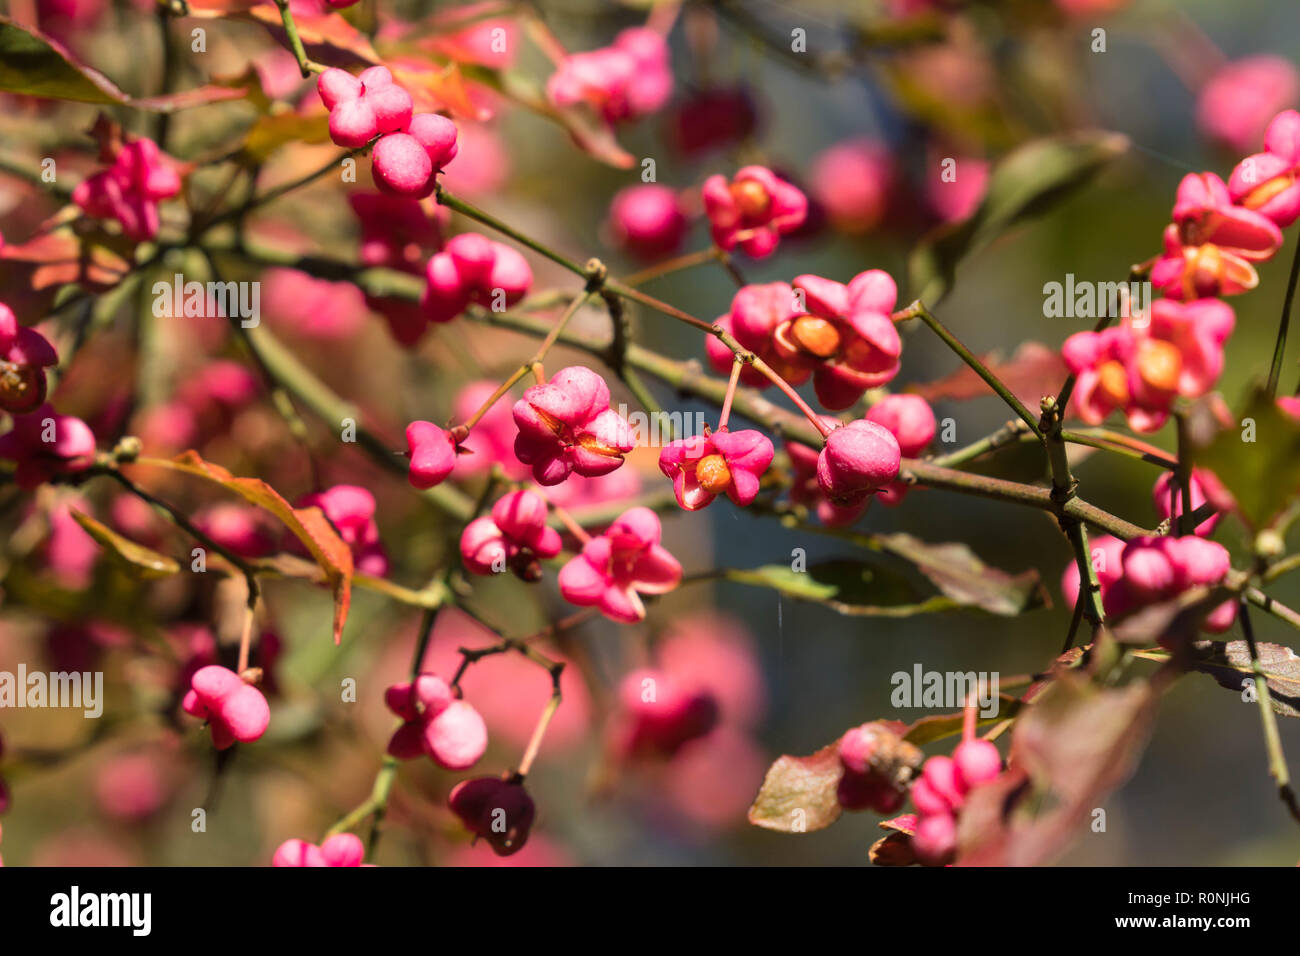 Fruit of the Common Spindle tree (Euonymus europaeus) on a nature reserve in the Herefordshire UK countryside. Stock Photo